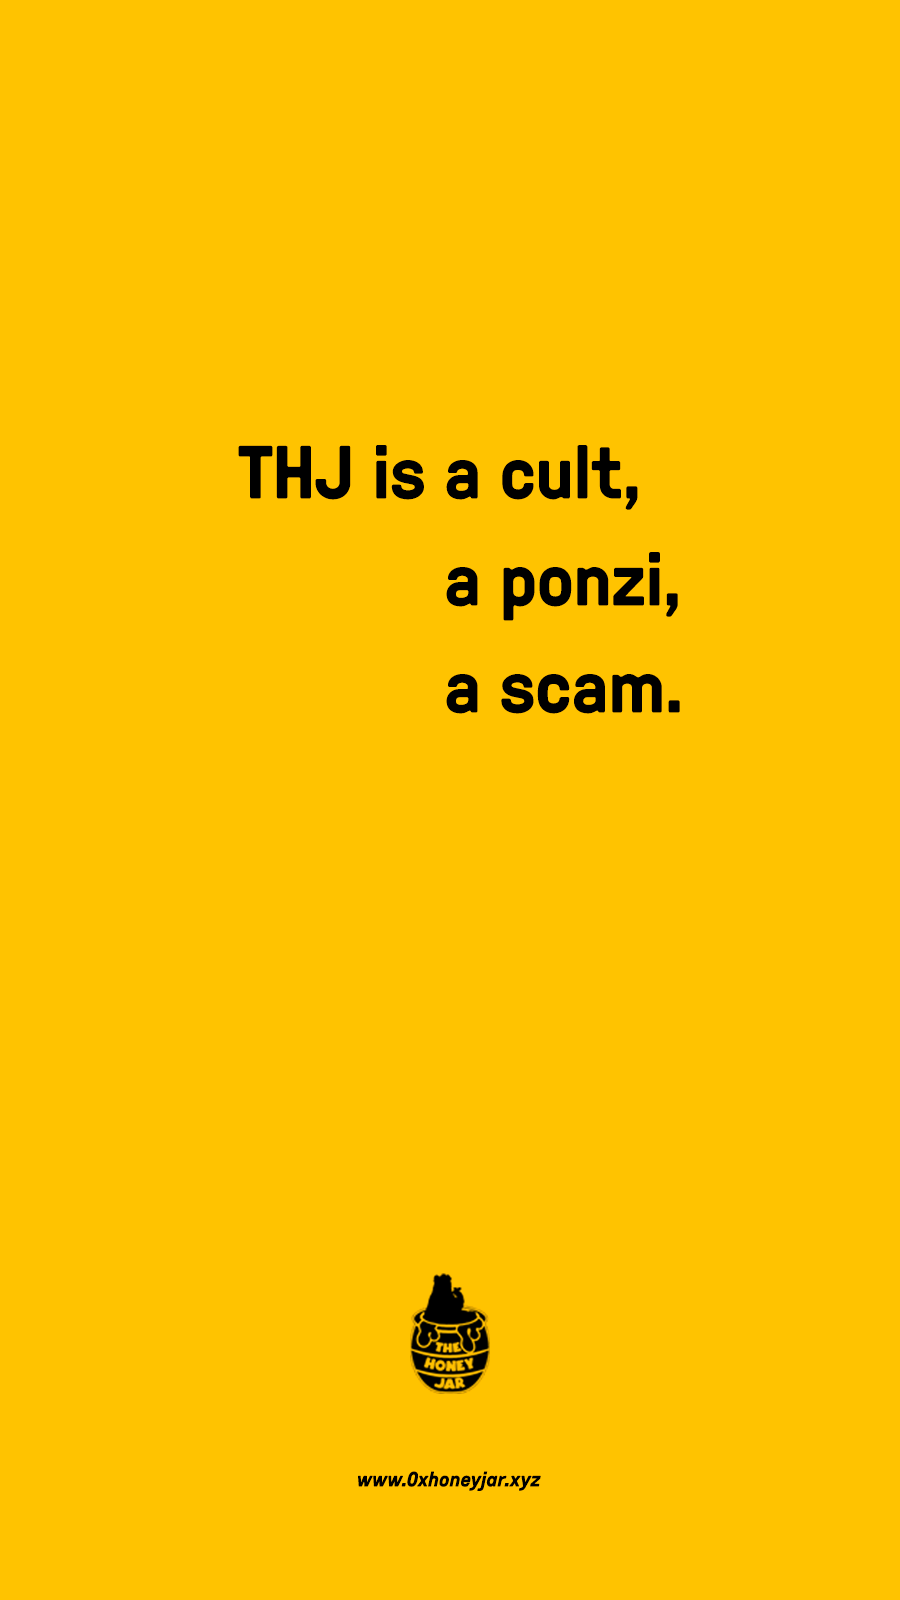 THJ is a cult, a ponzi, a scam